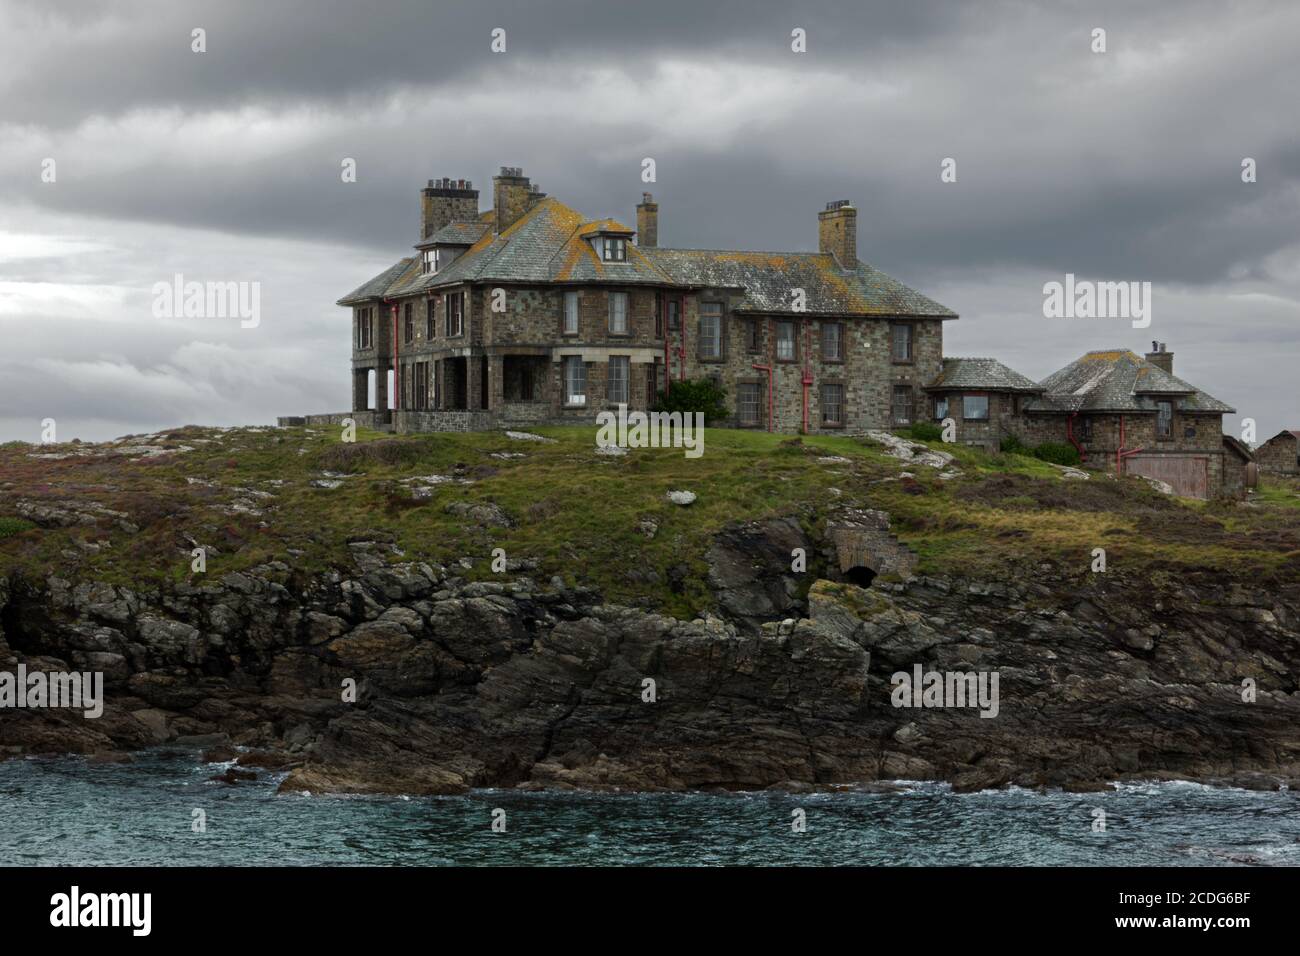 Craig y Mor is a Grade II Listed Building in Trearddur Bay on the Isle of Anglesey. It was used in the TV series Safe House and said to be haunted. Stock Photo